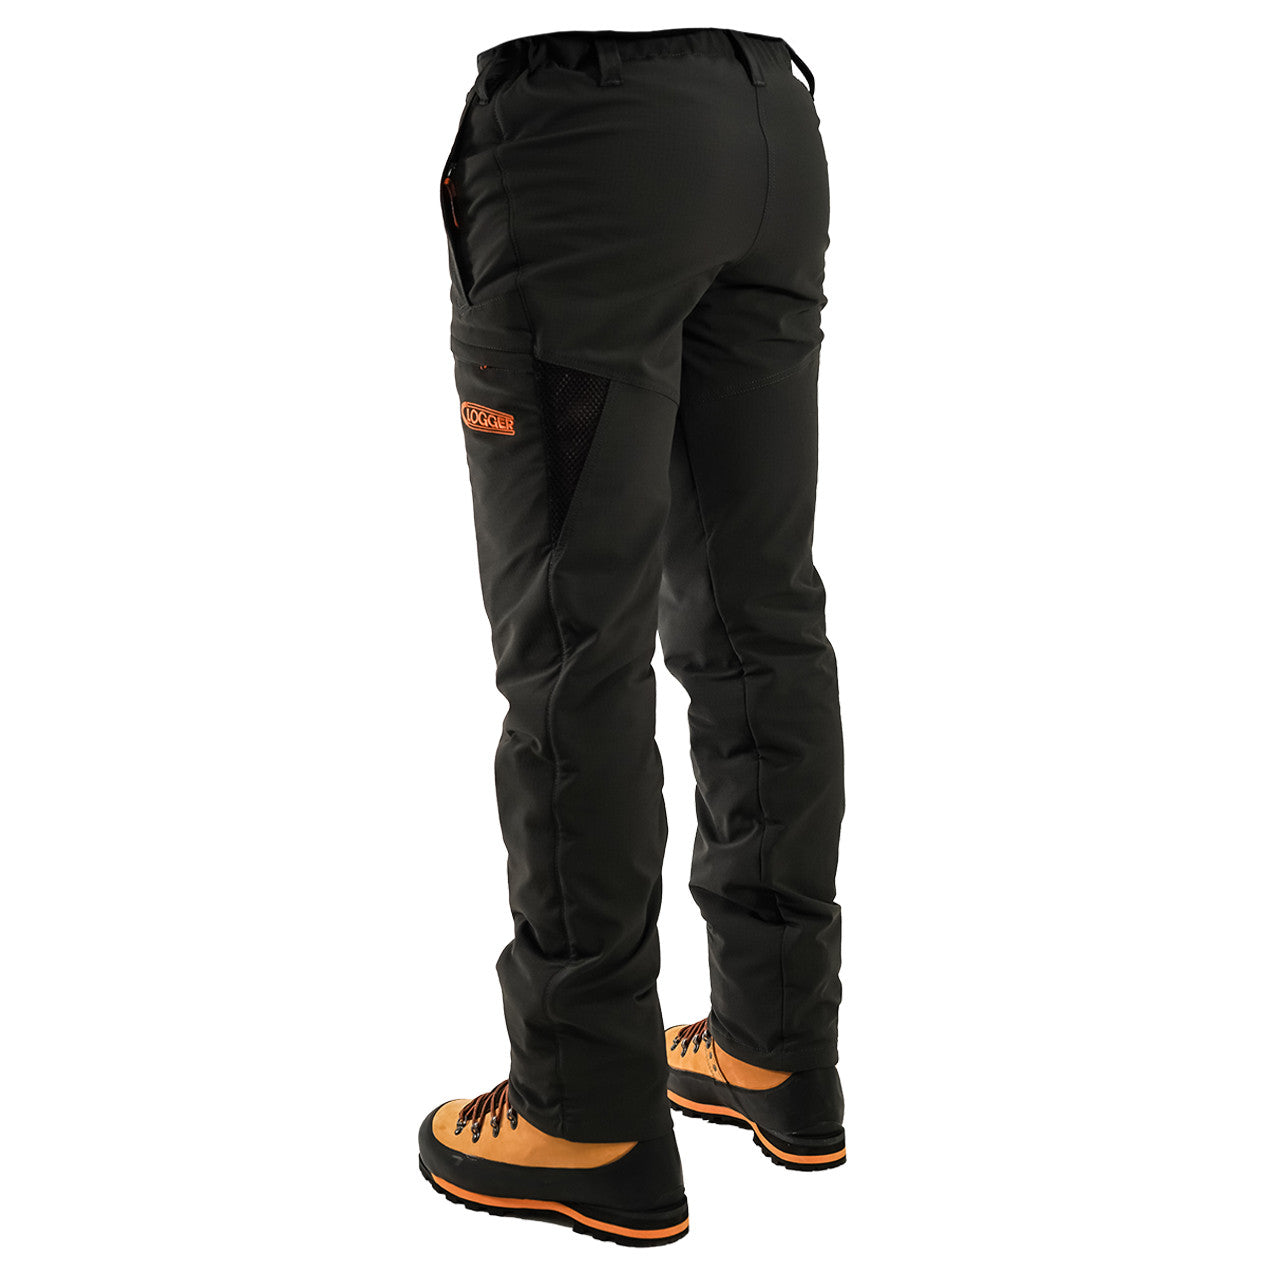 Clogger DefenderPRO Gen2 Tough Men's Chainsaw Trousers with Reflective Band